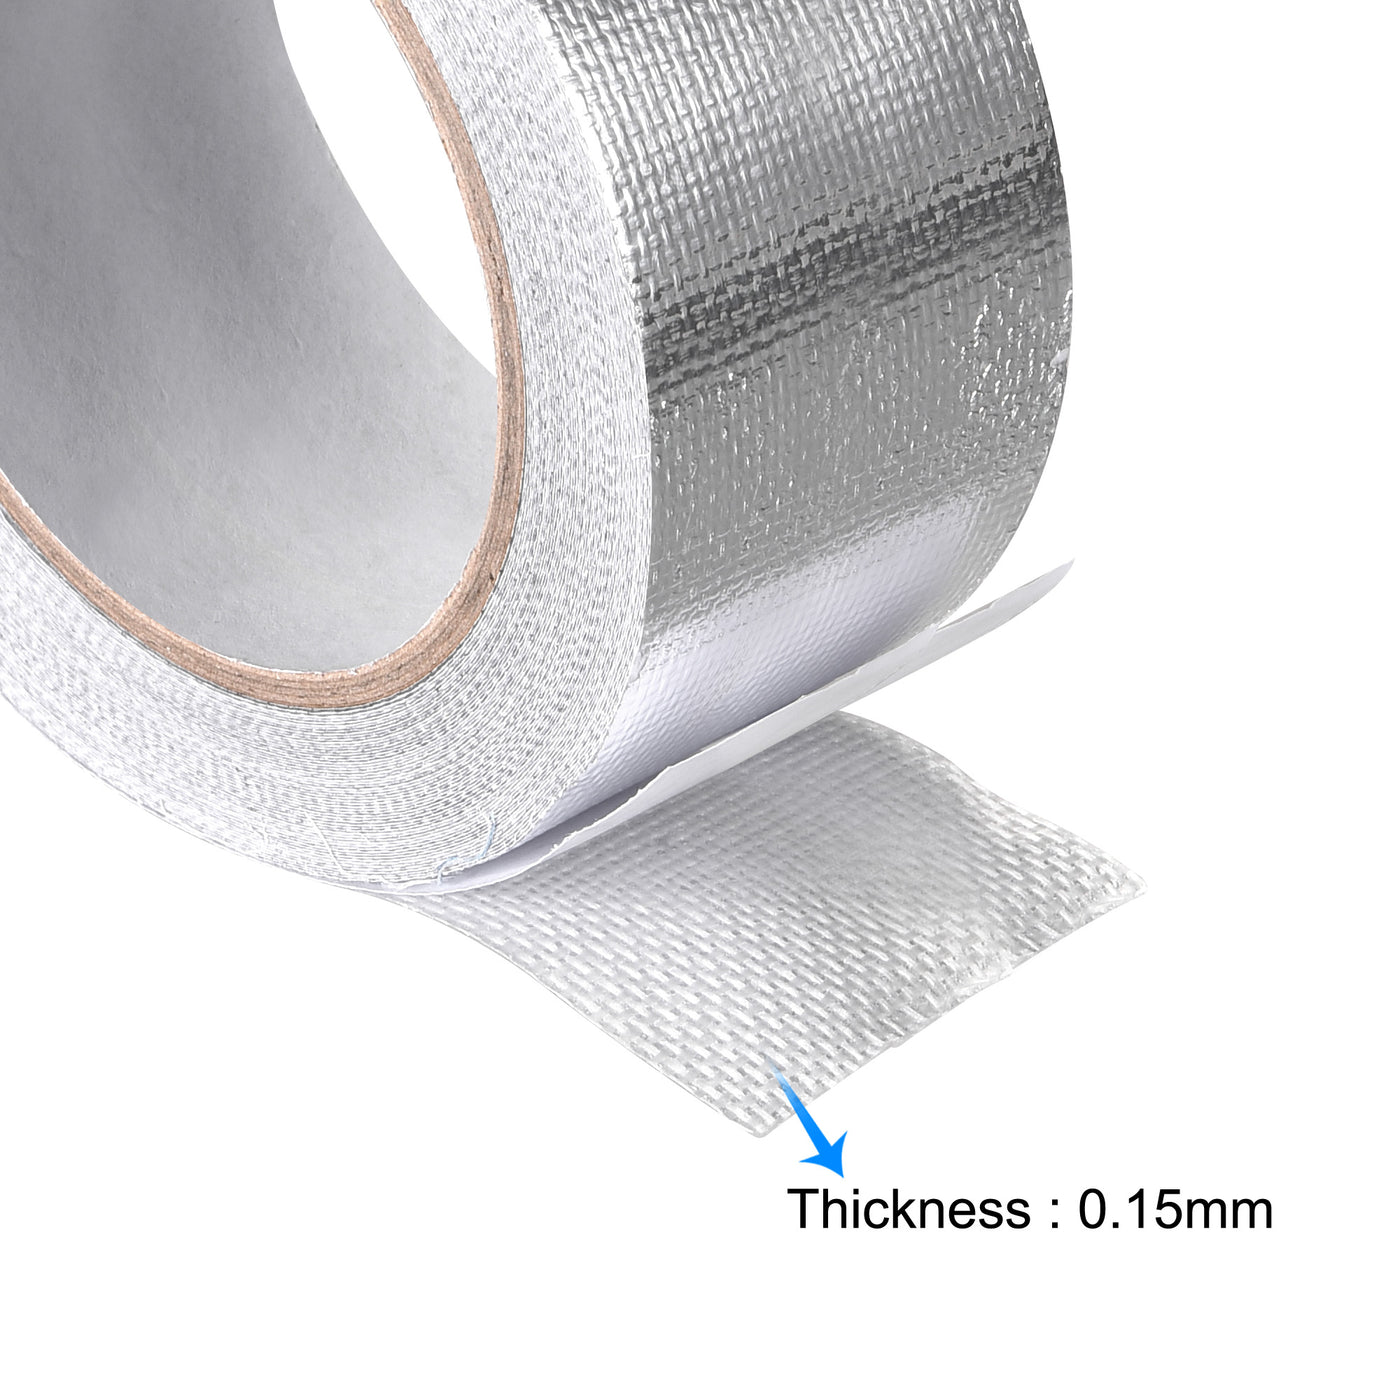 uxcell Uxcell Aluminum Foil Tape High-Temperature Tape for HVAC,Sealing 60mmx20m/65ft